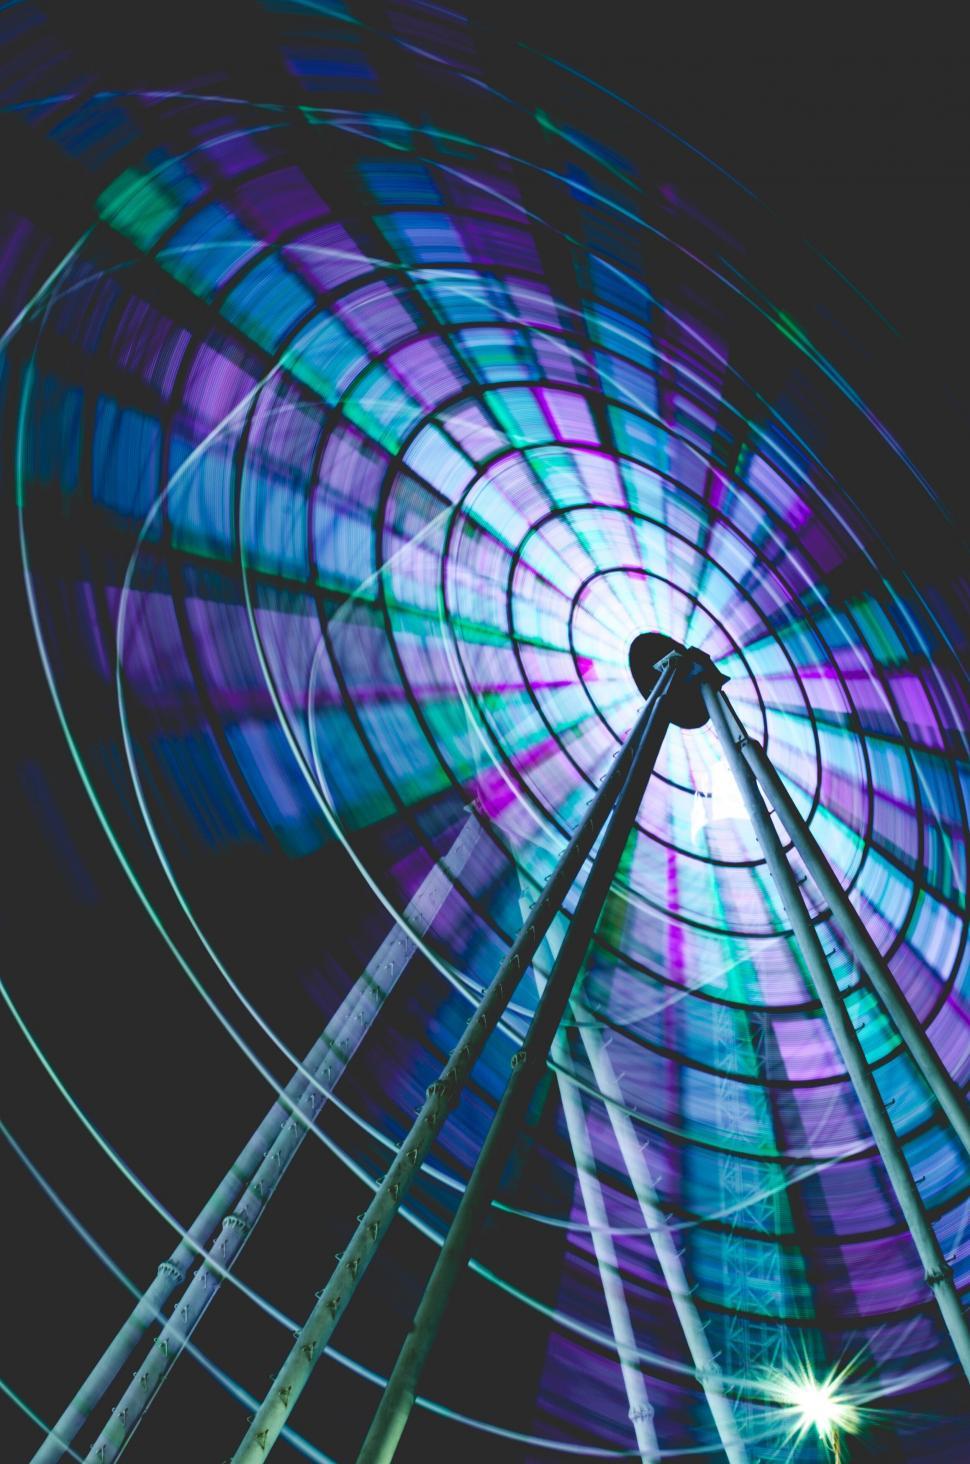 Free Image of Spinning Ferris wheel in vibrant colors 